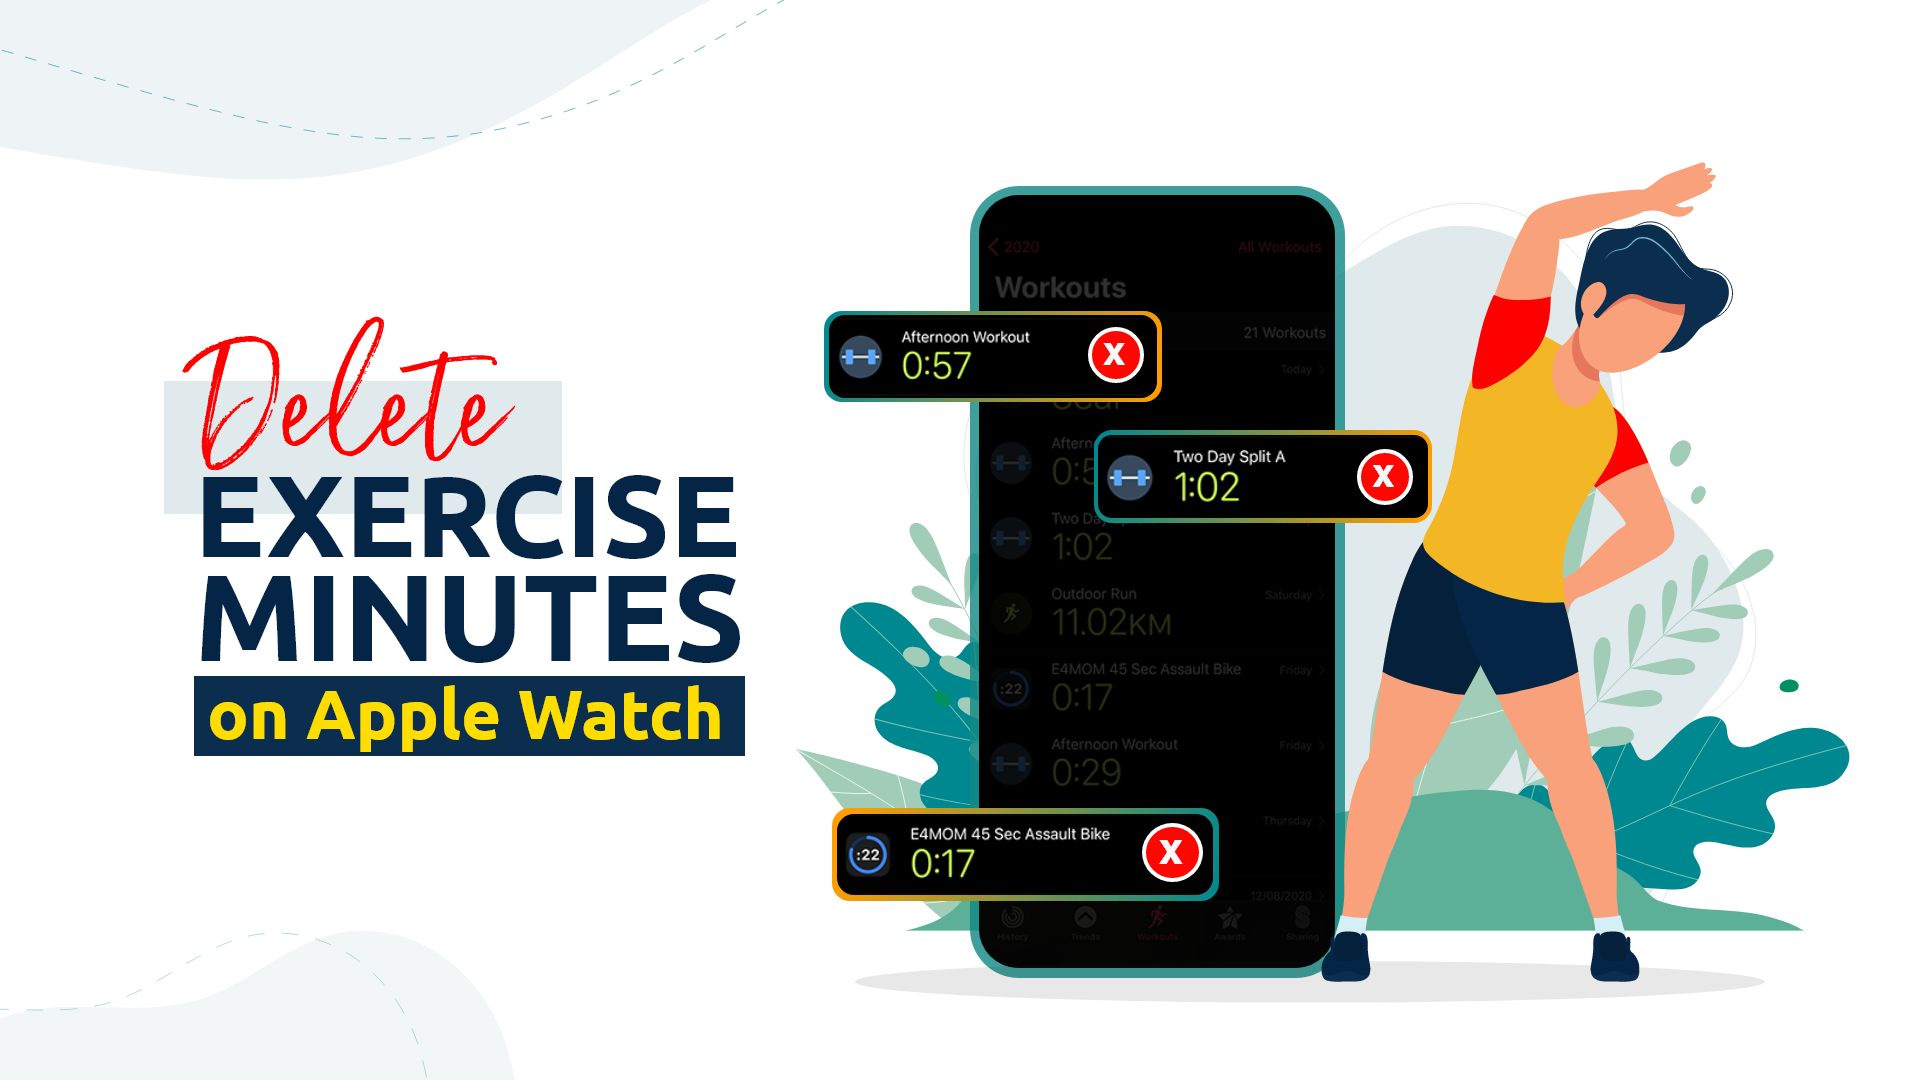 How to Delete Exercise Minutes on Apple Watch